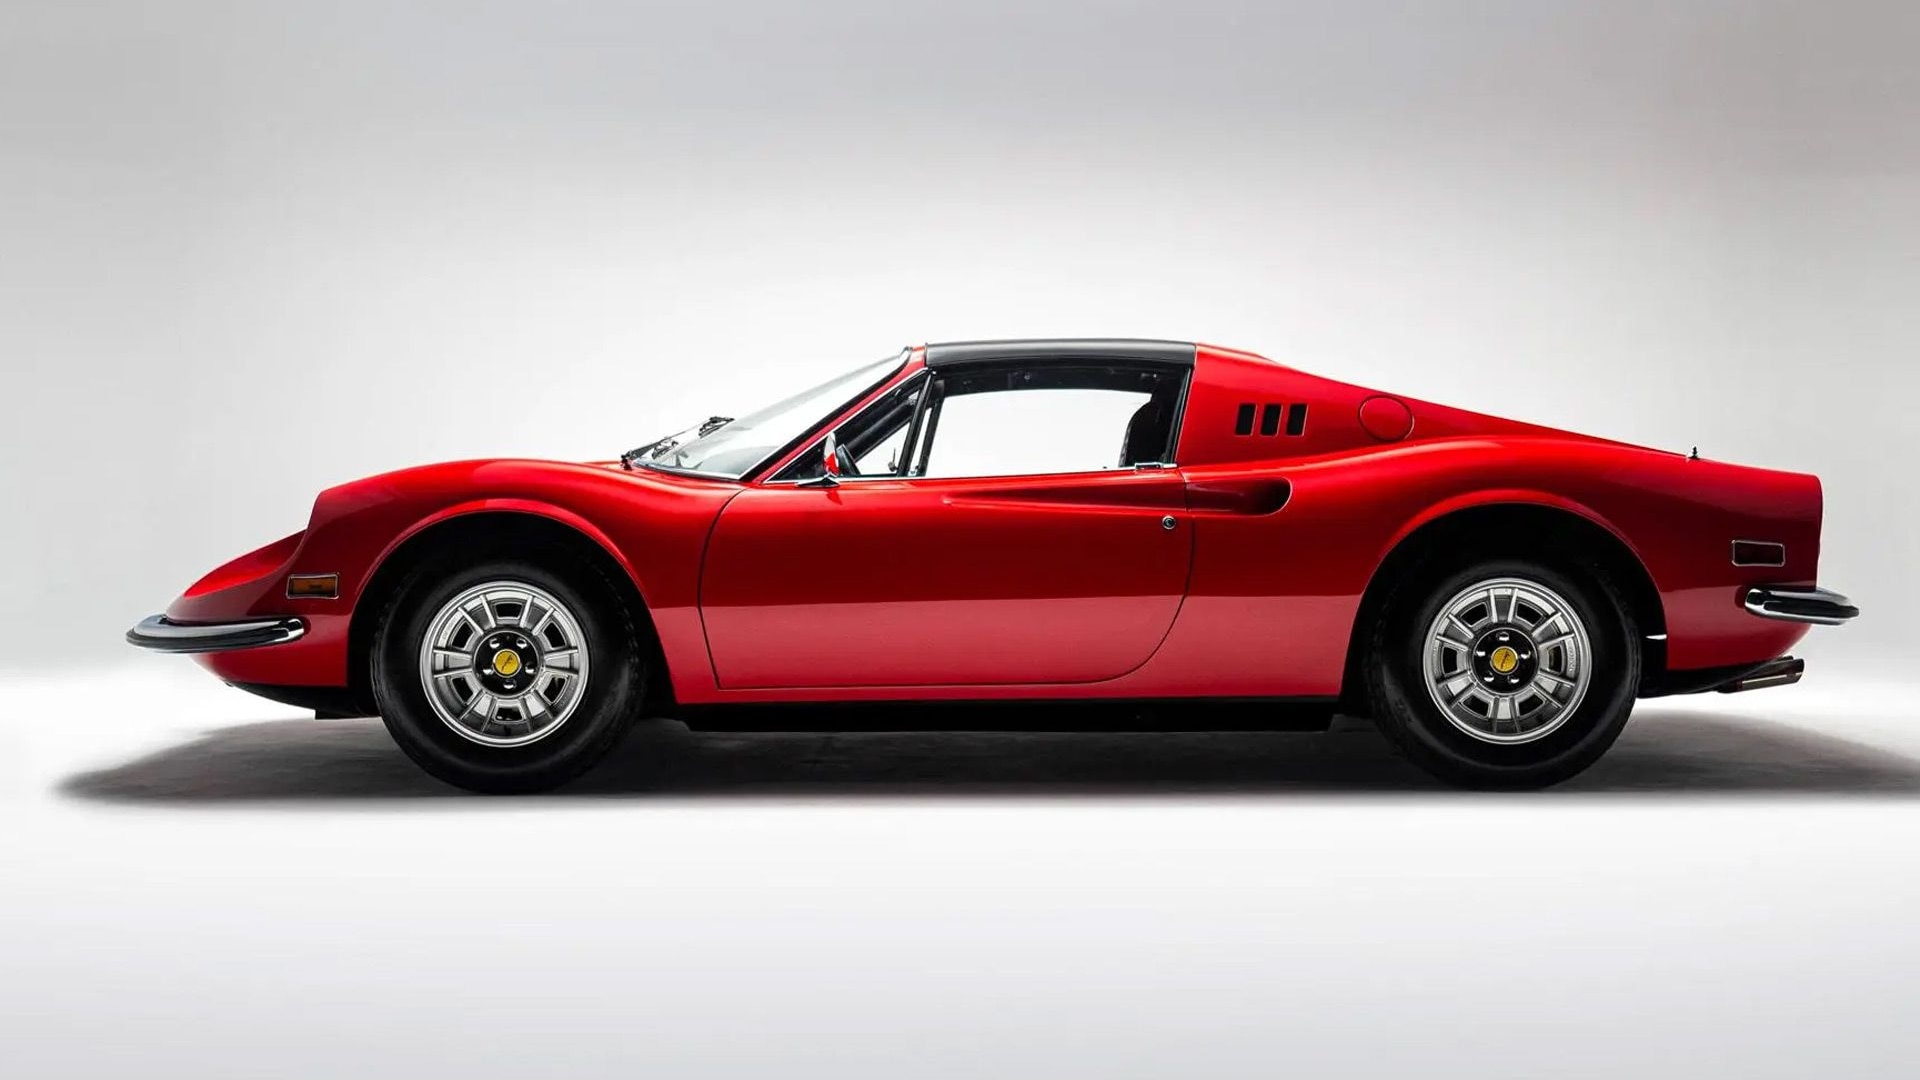 1972 Ferrari Dino 246 GTS once owned by Cher - Photo credit: Bring a Trailer